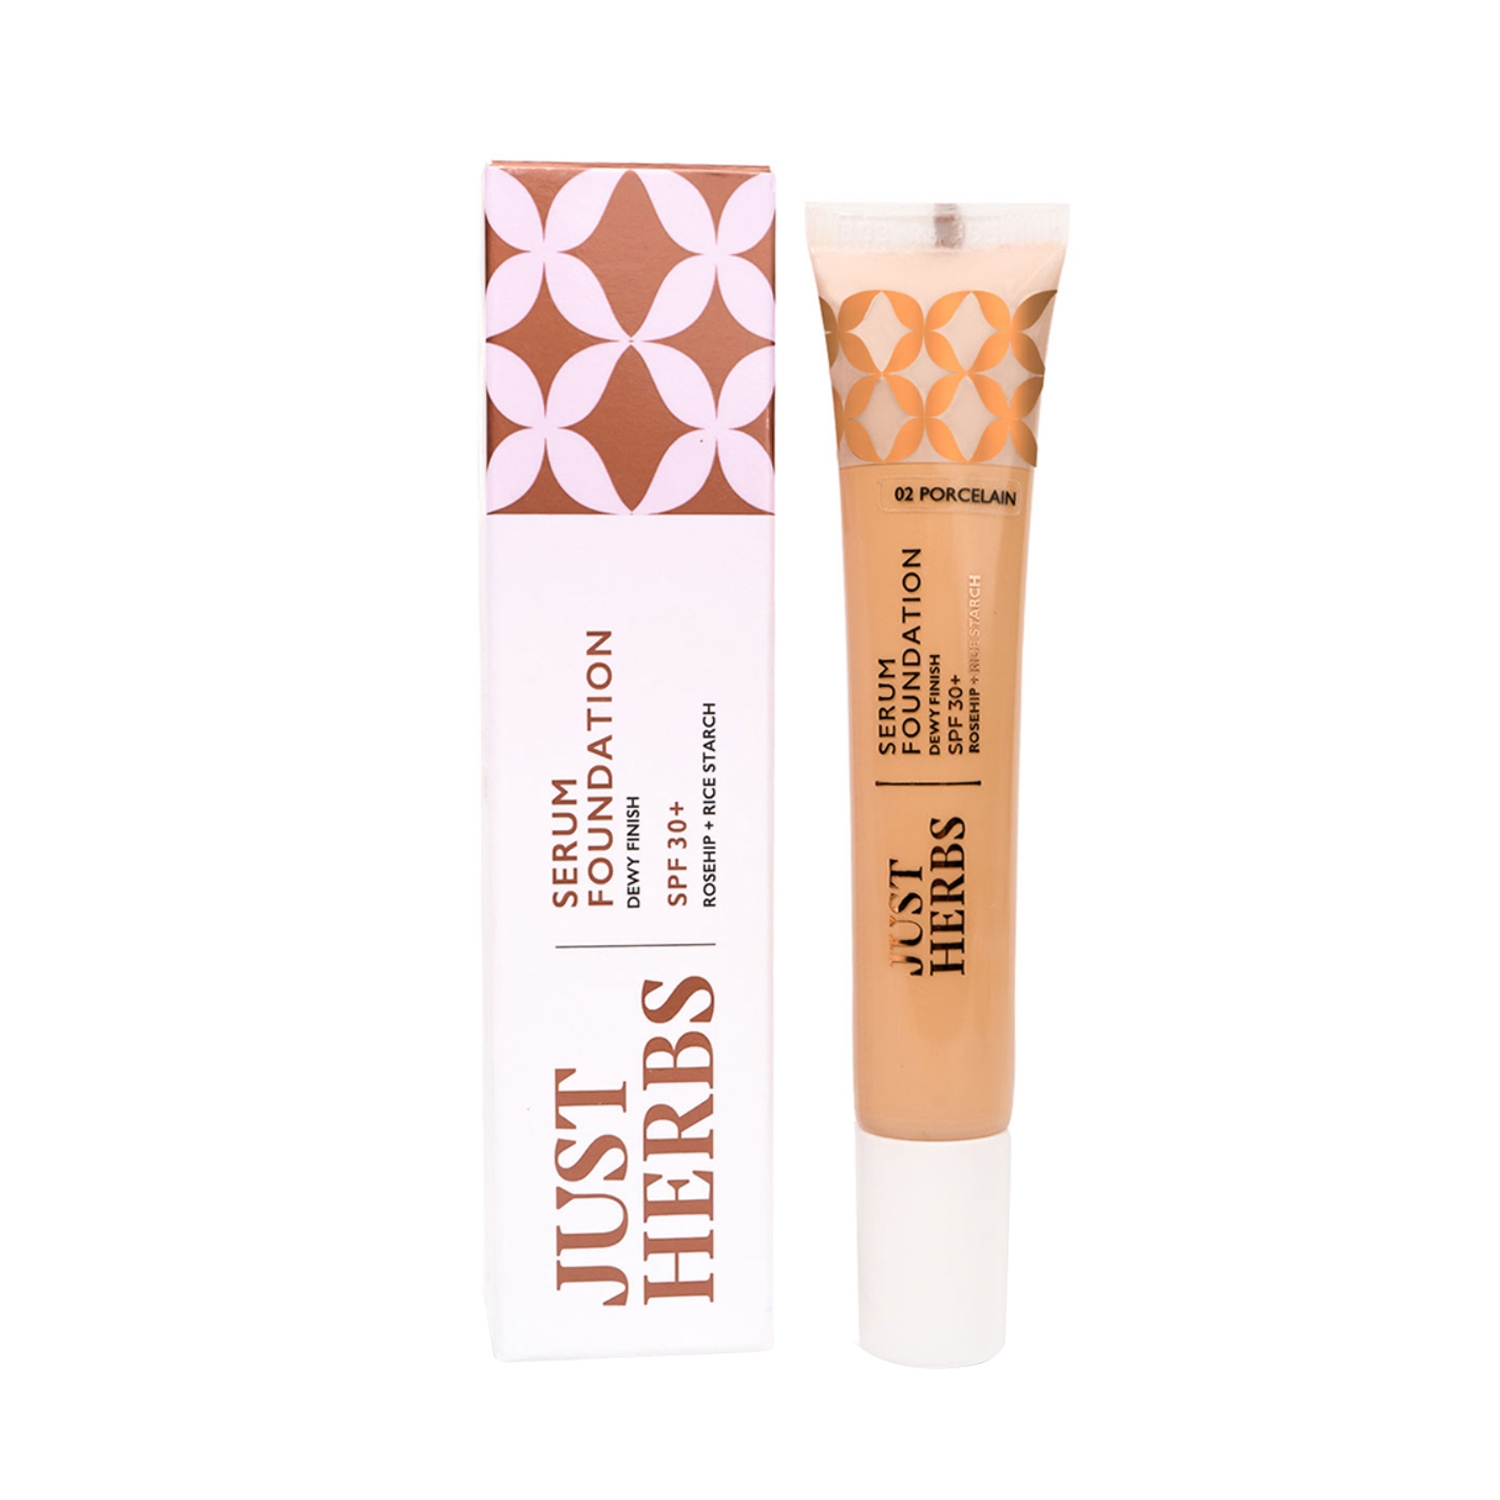 Just Herbs | Just Herbs Serum Foundation Dewy Finish SPF 30+ With Rosehip & Rice Starch - 02 Porcelain (20ml)